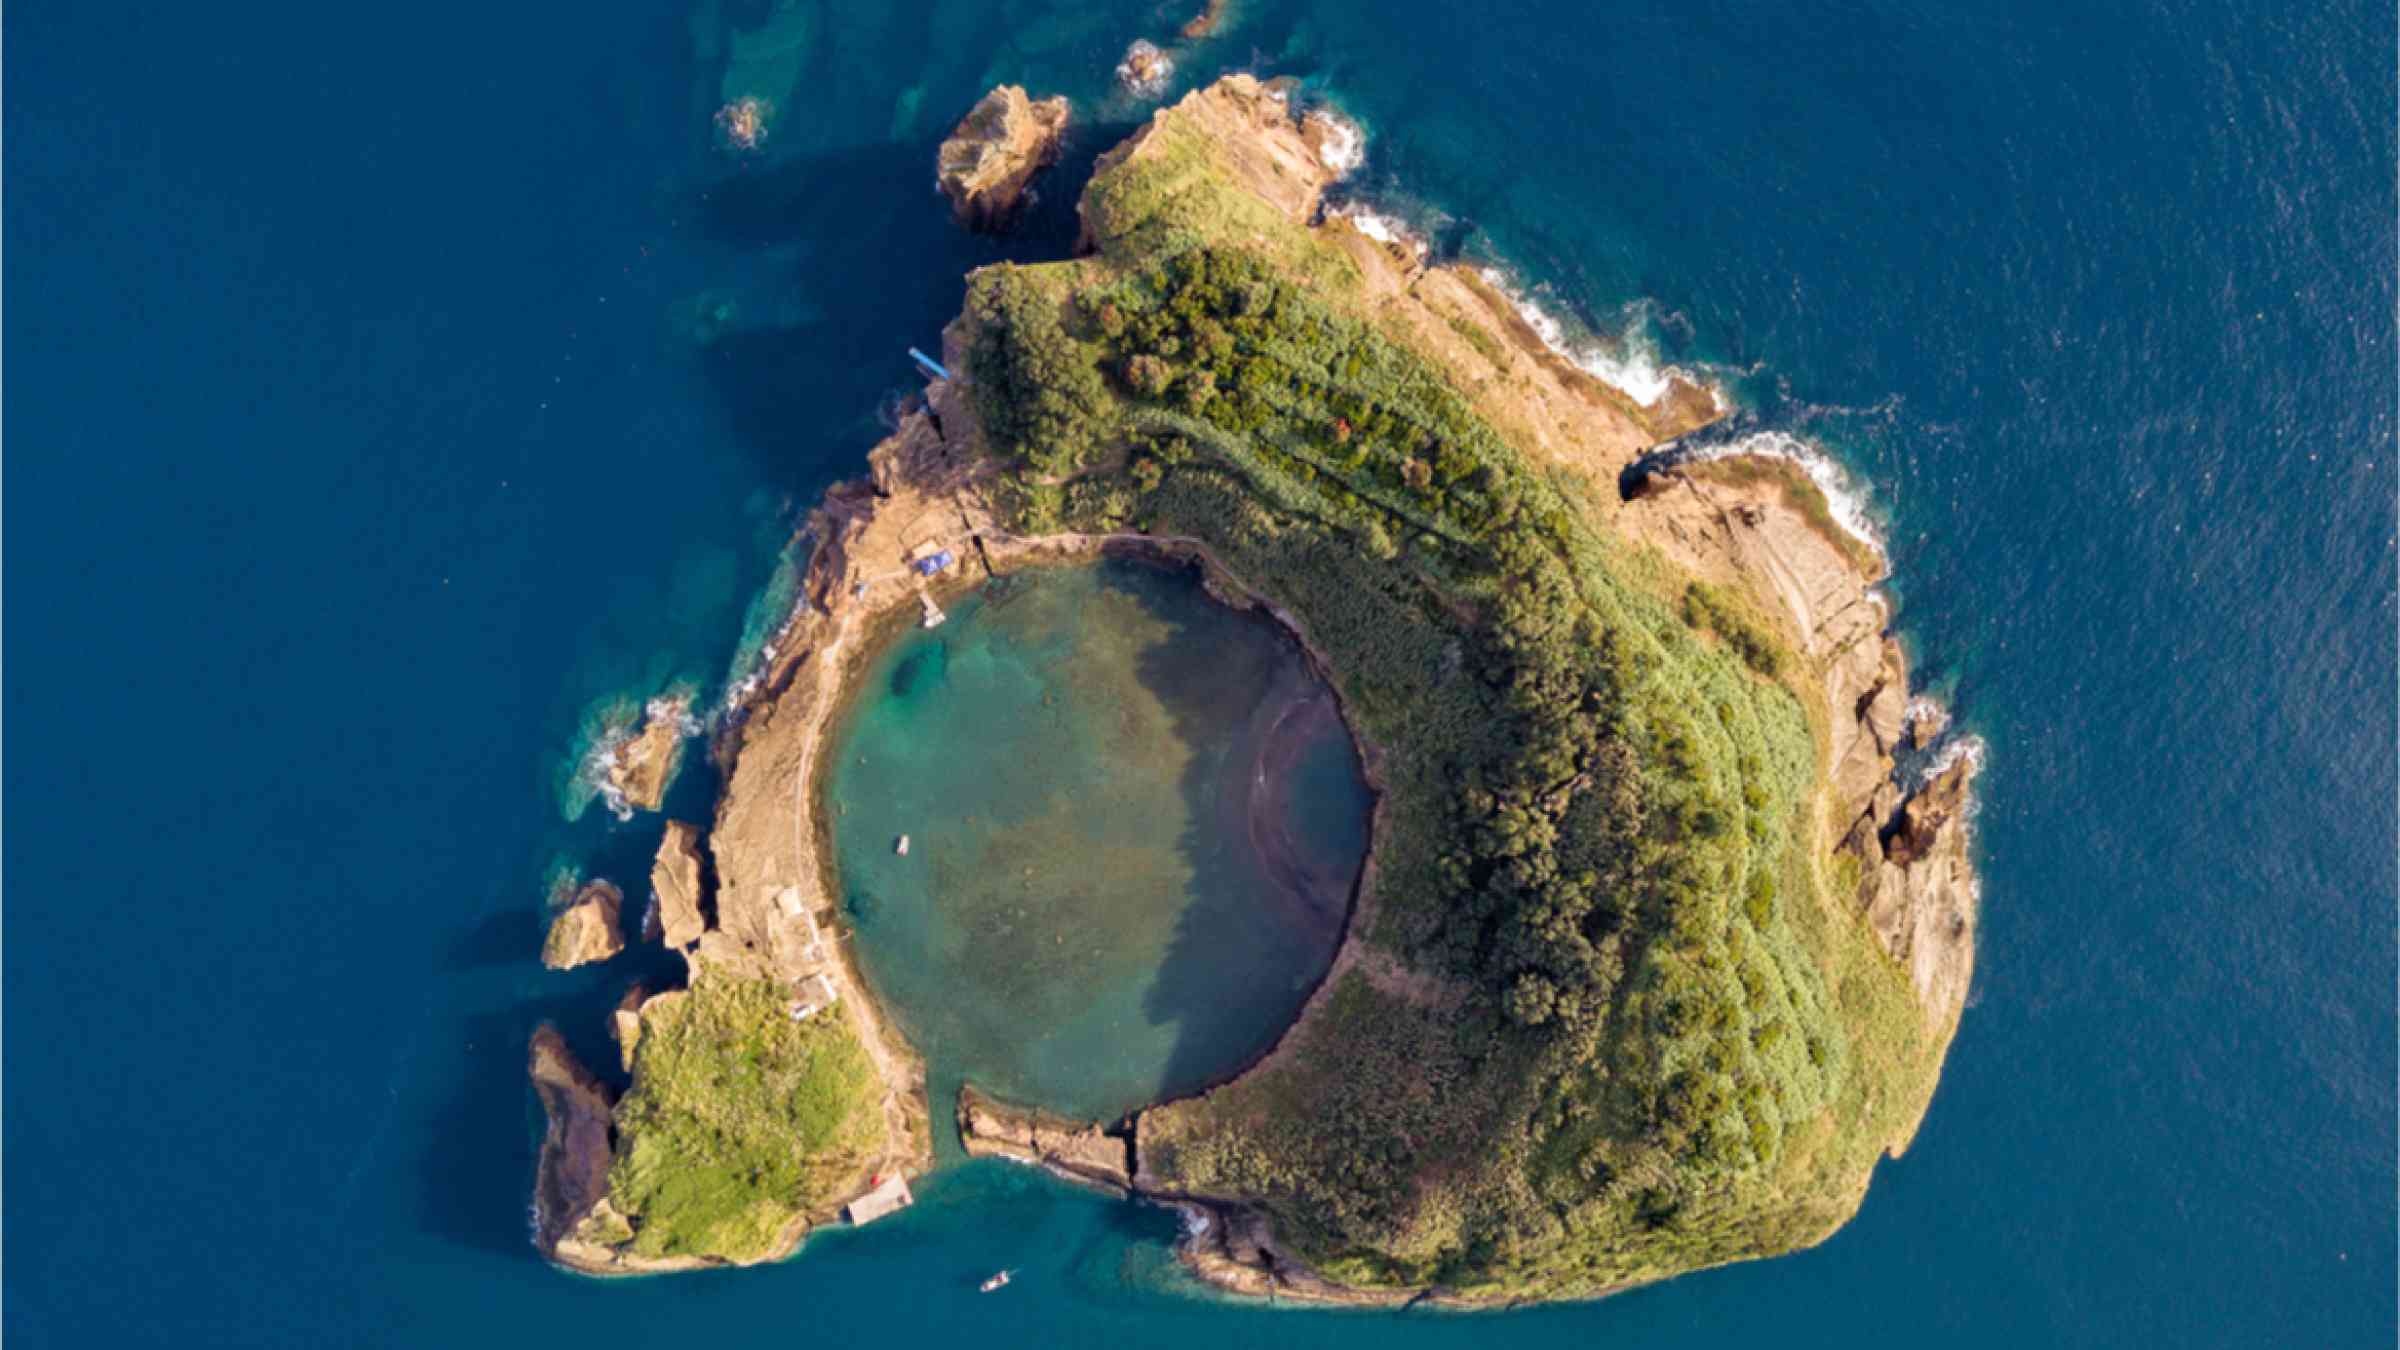 Bird's eye view of Vila Franca do Campo island with a crater of an ancient underwater volcano.